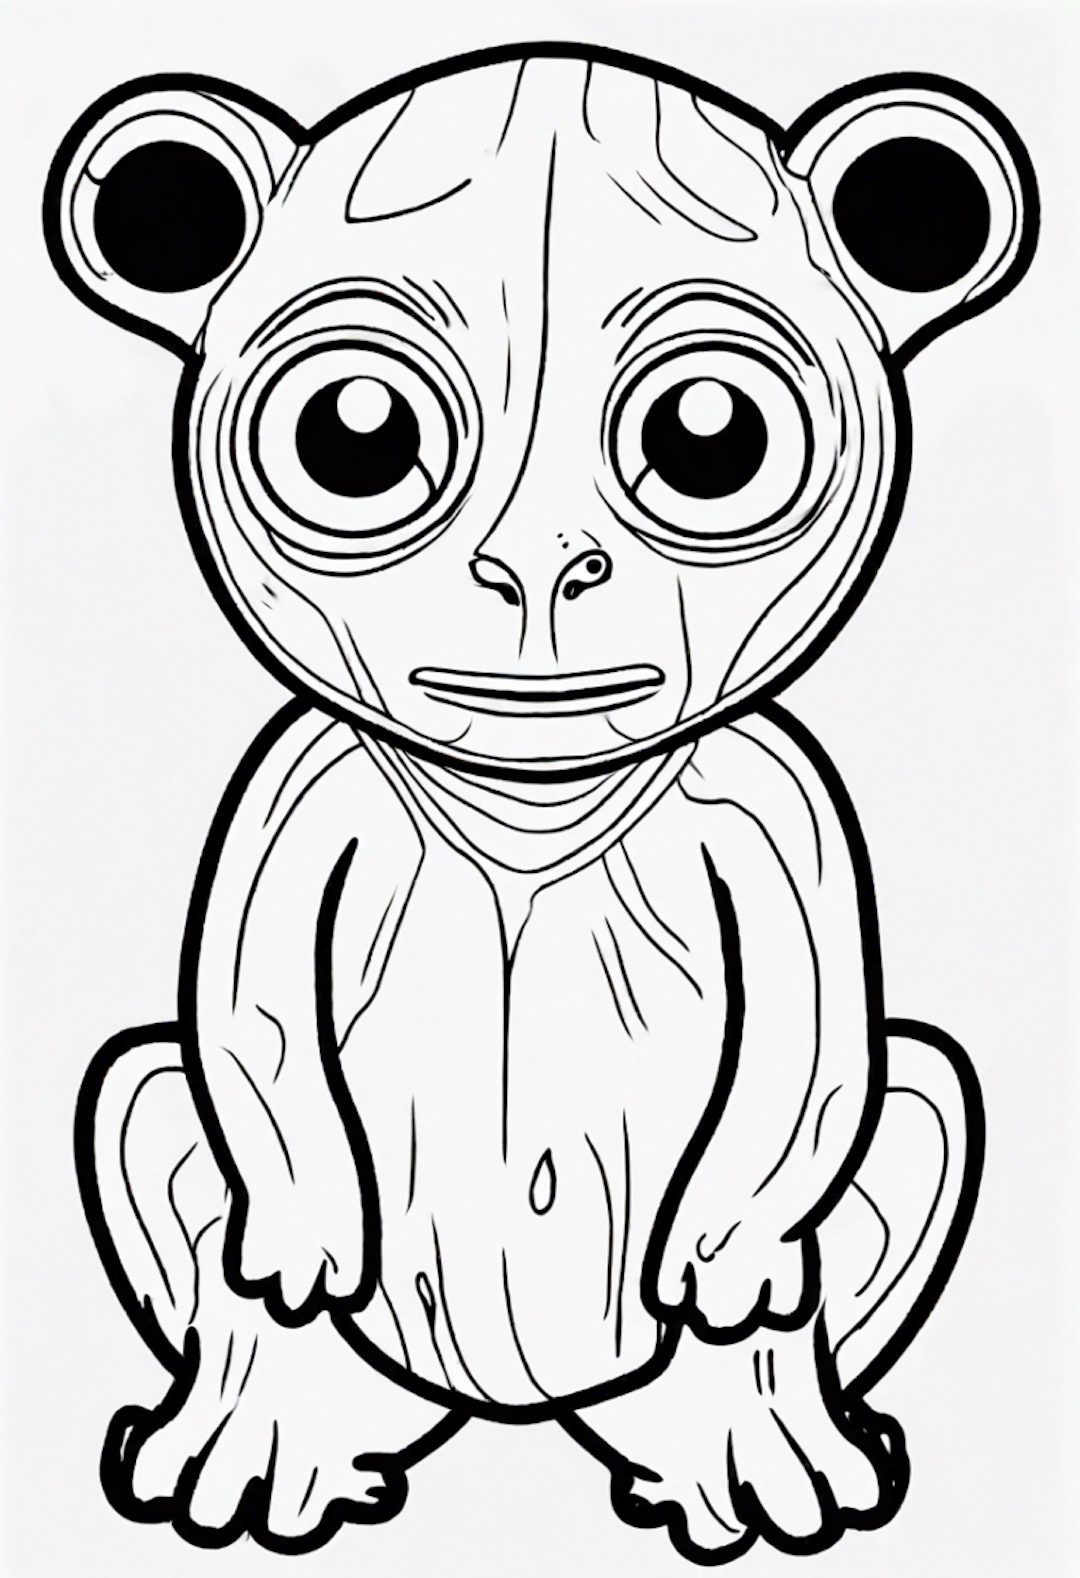 Forest Guardian Coloring Page coloring pages